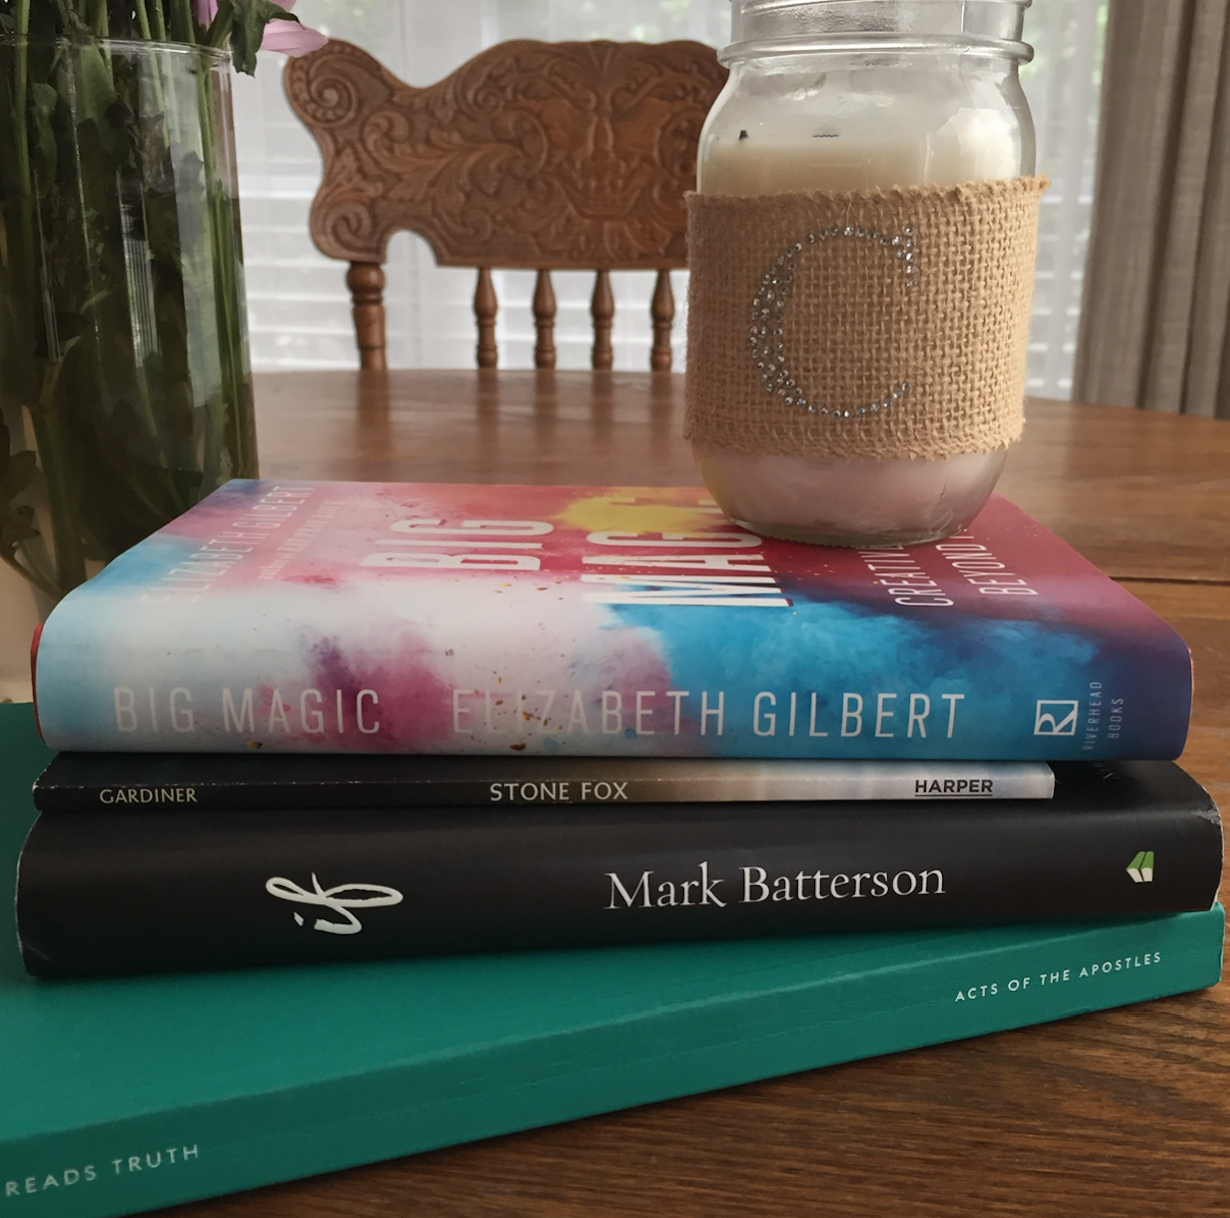 3 Books I Read This Week